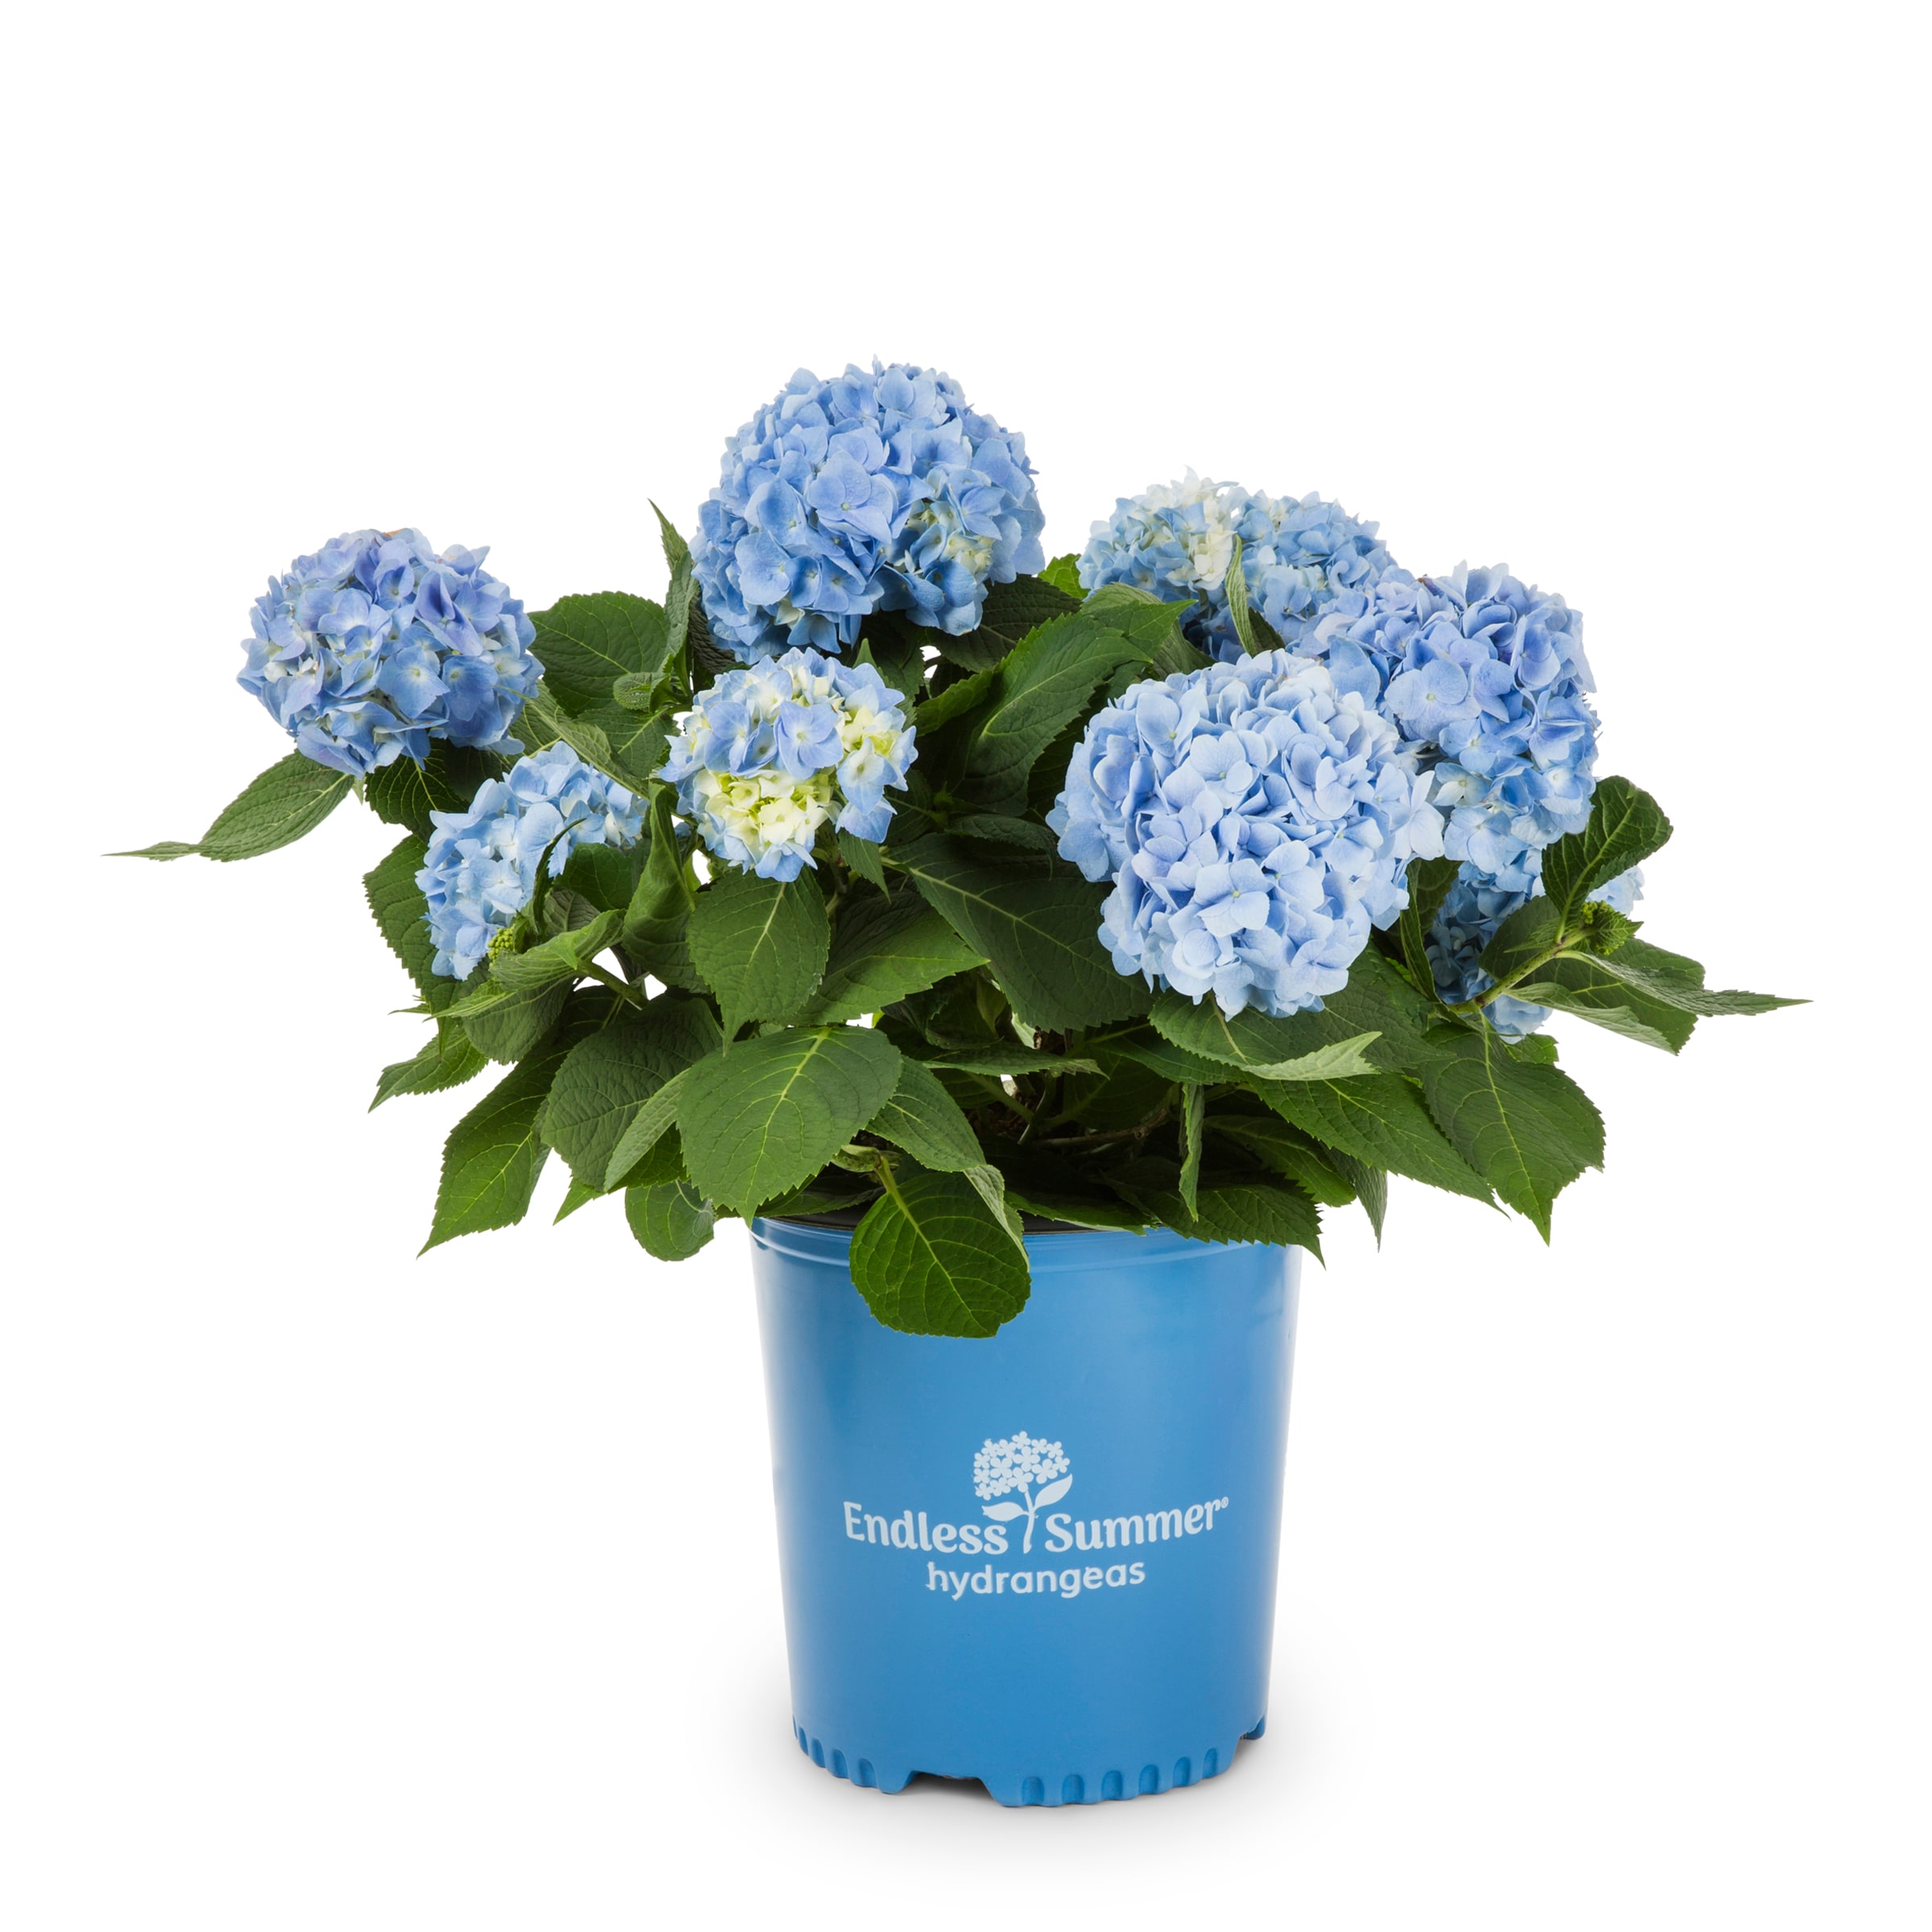 Image of Endless Summer hydrangea in pot 2